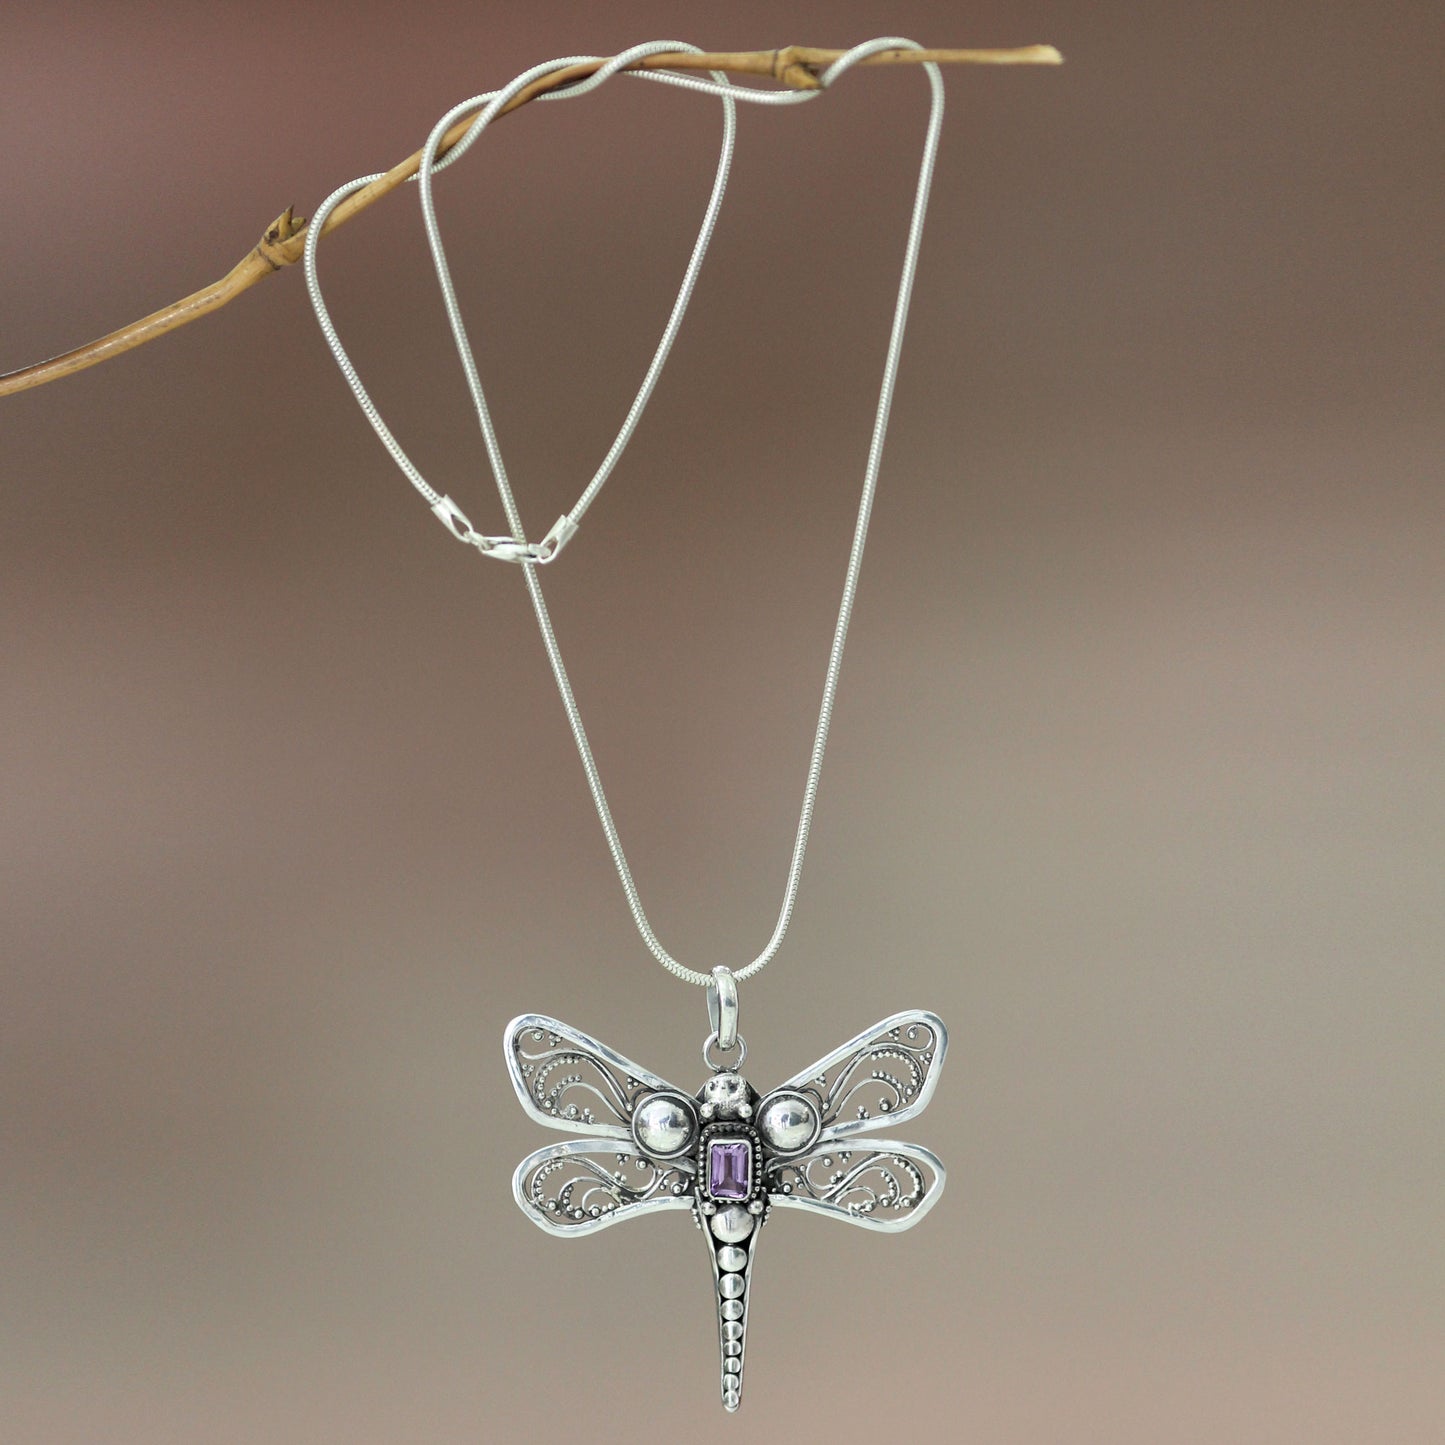 Lavender Dragonfly Amethyst Sterling Silver Necklace